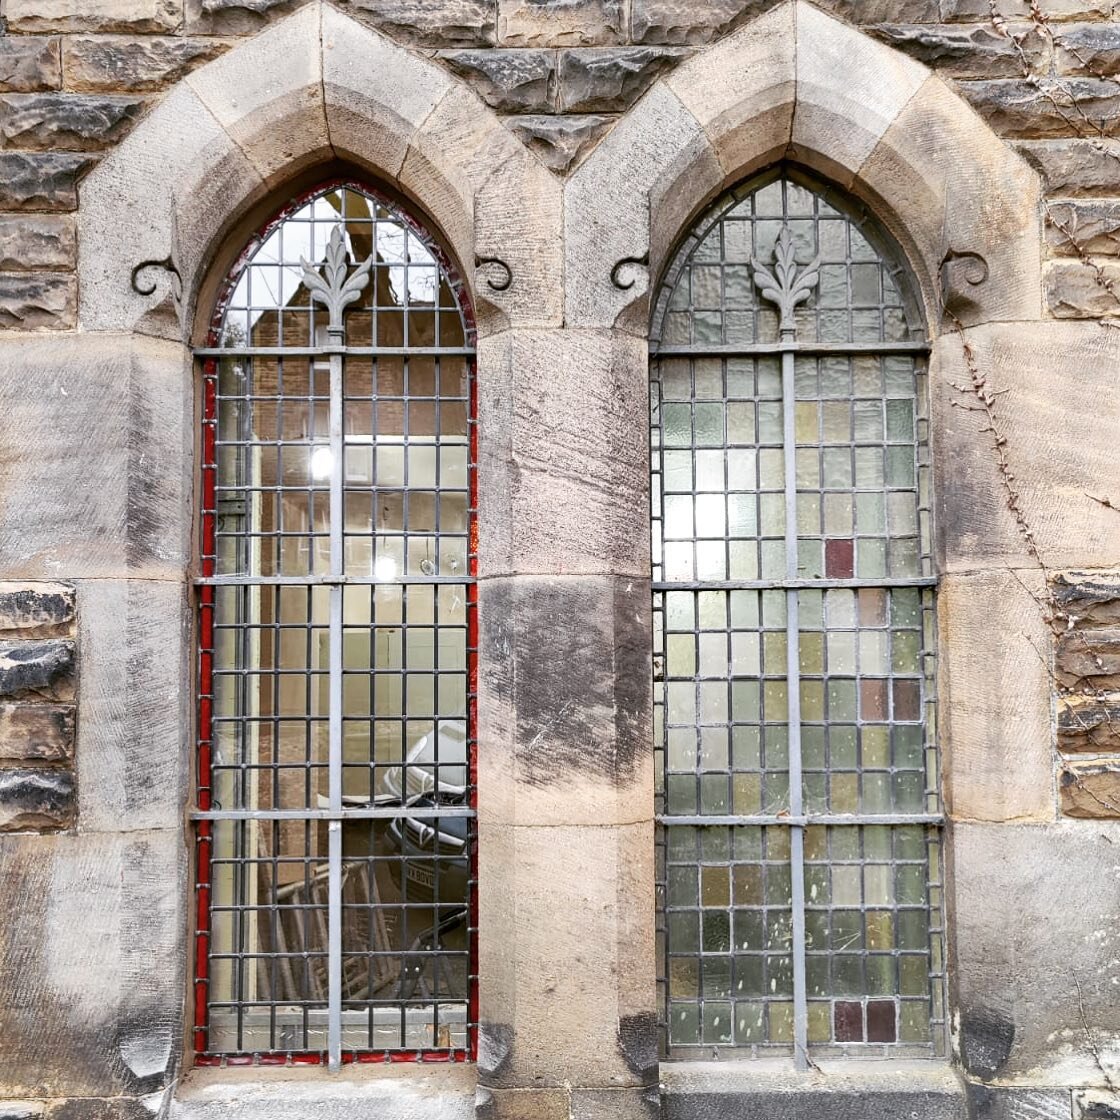 What a difference a new window makes.
New single glazed leaded lights installed at Hyde Park - Leeds 
#leadedlights #stainedglass #leadedwindows #glass #window #historic #historicbuildings #listed #architecture #rennovation #replacement #leadwork #wi